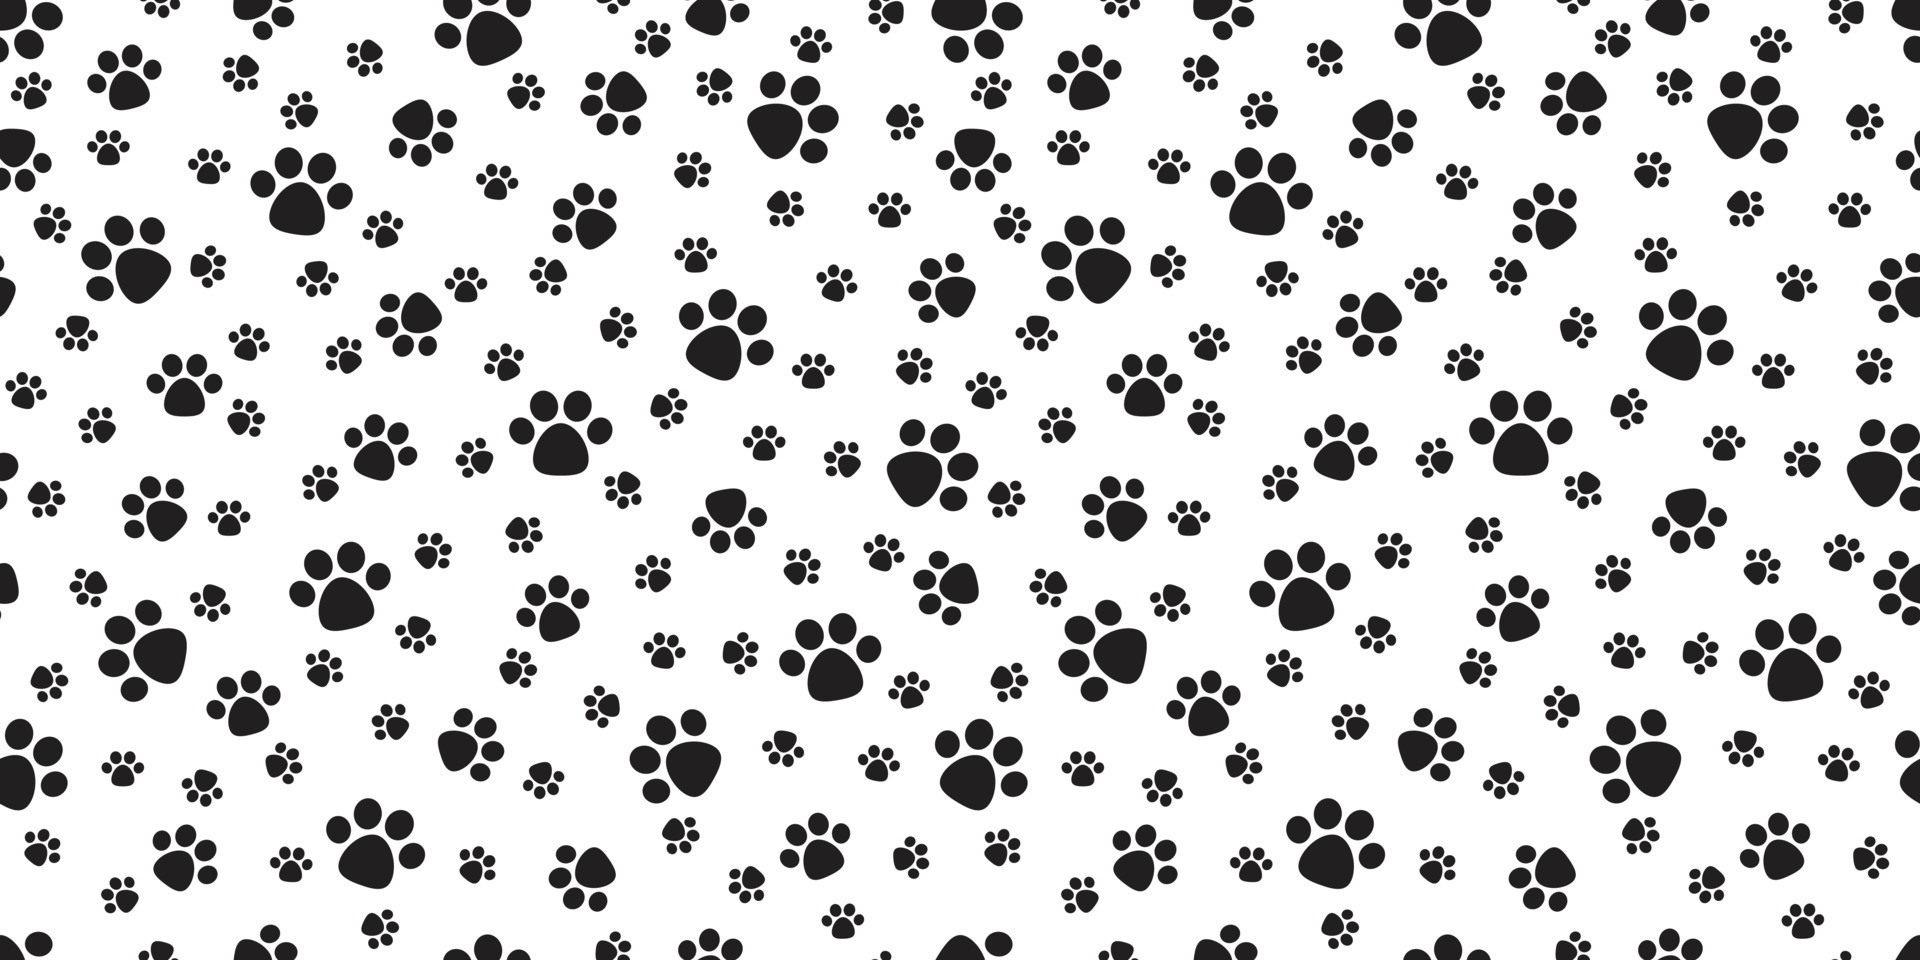 Download the Dog Paw Seamless Pattern vector Cat Paw puppy footprint wallpa...